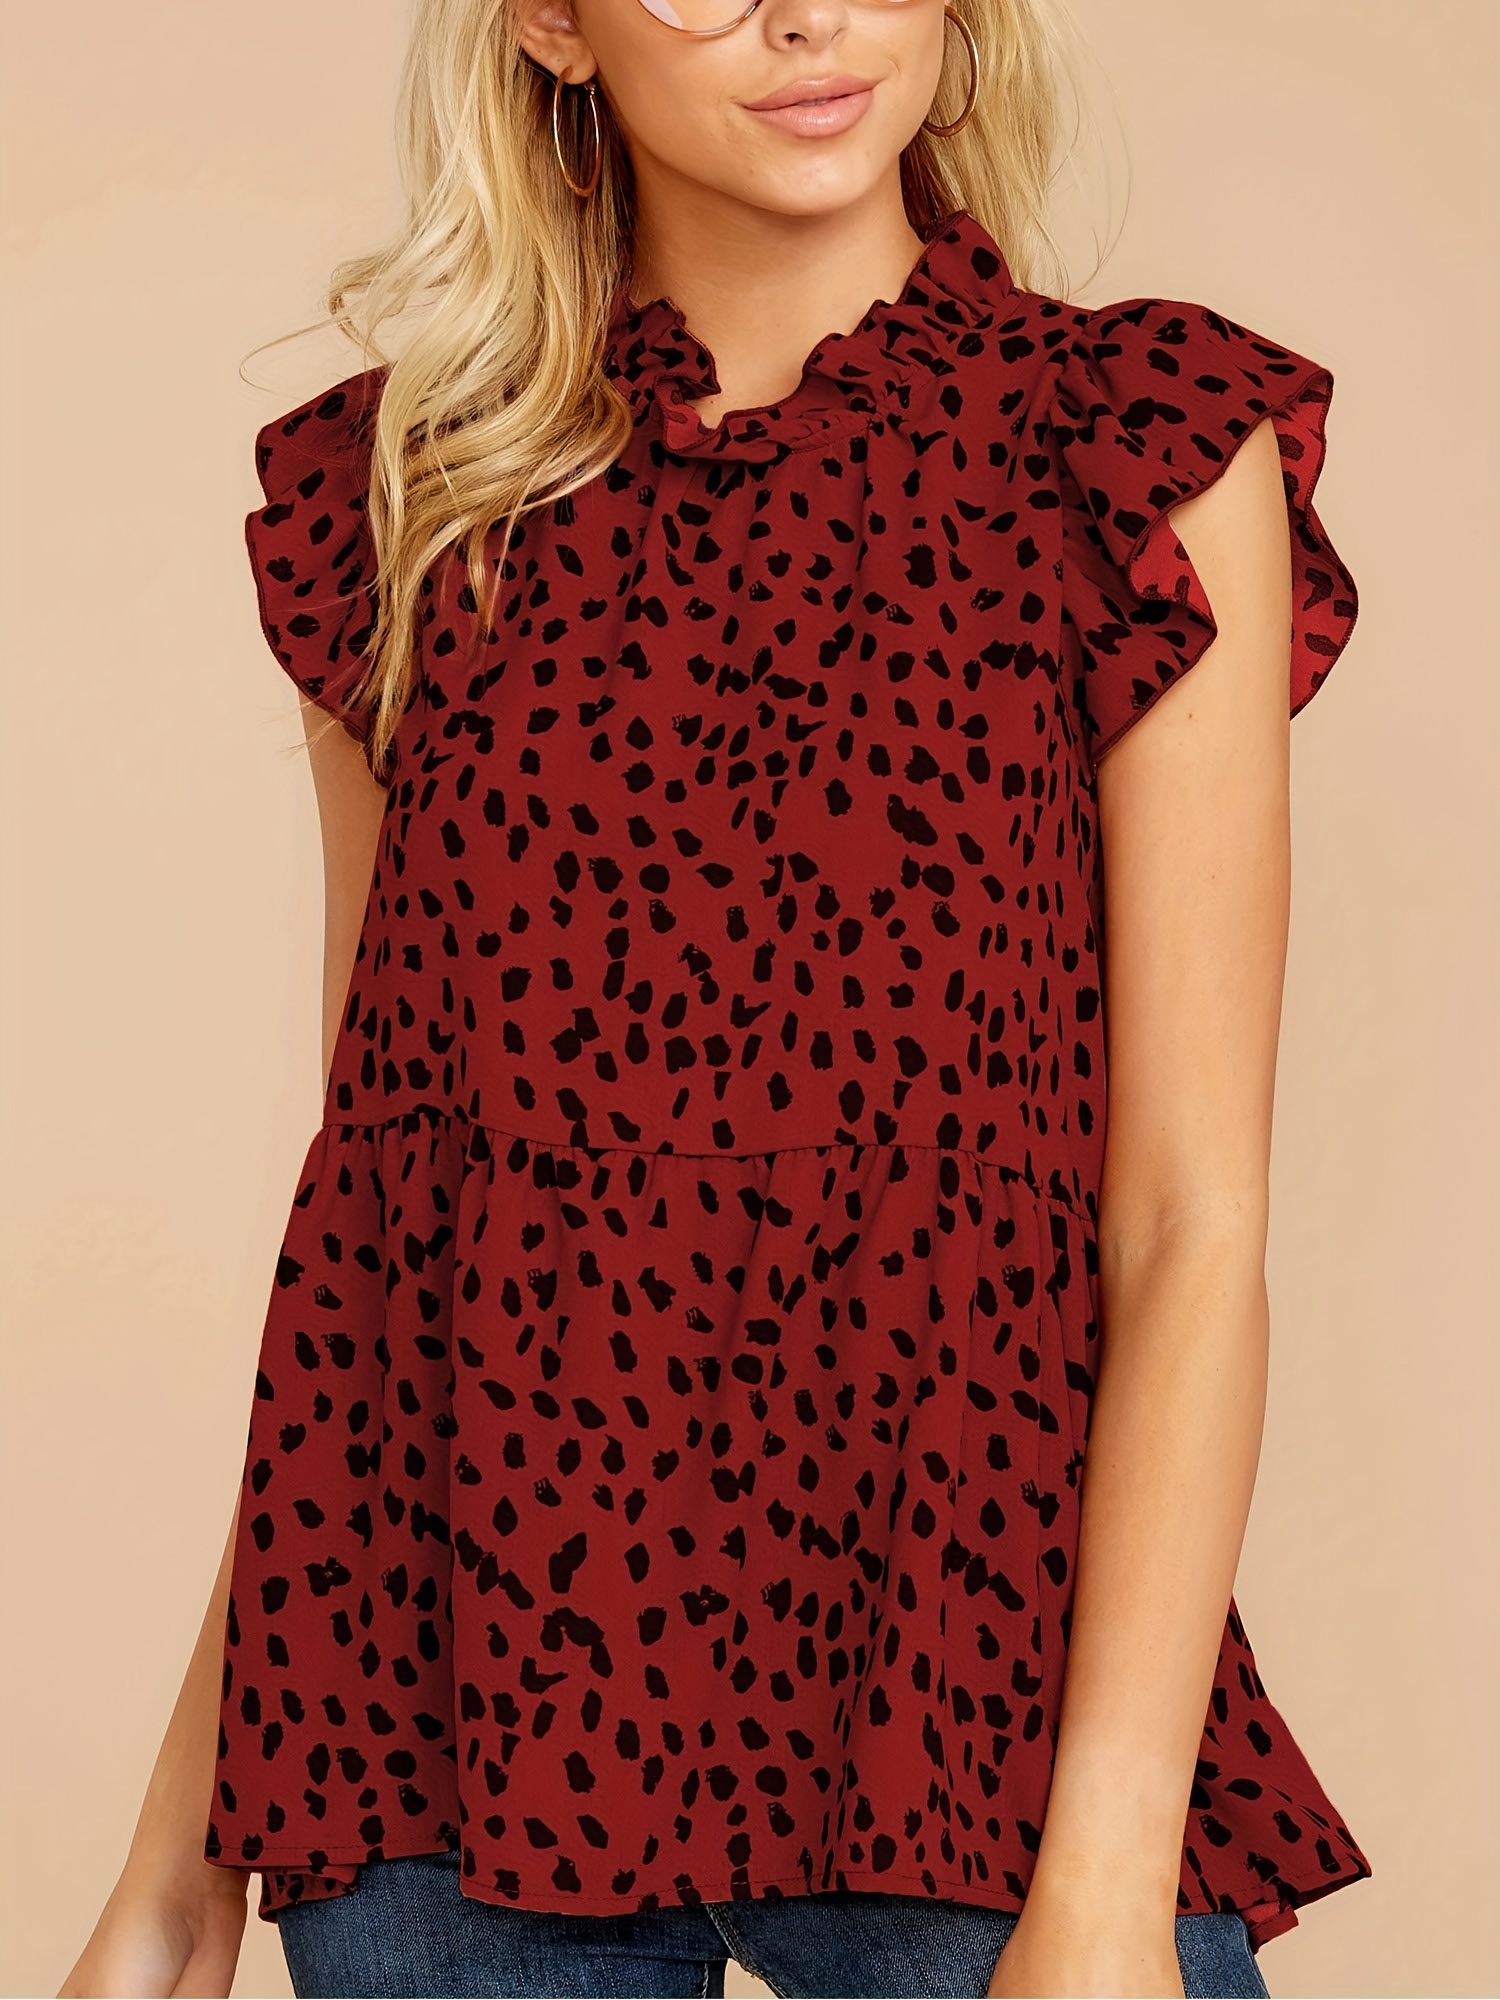 Shop All-Over Print High Neck Top Online